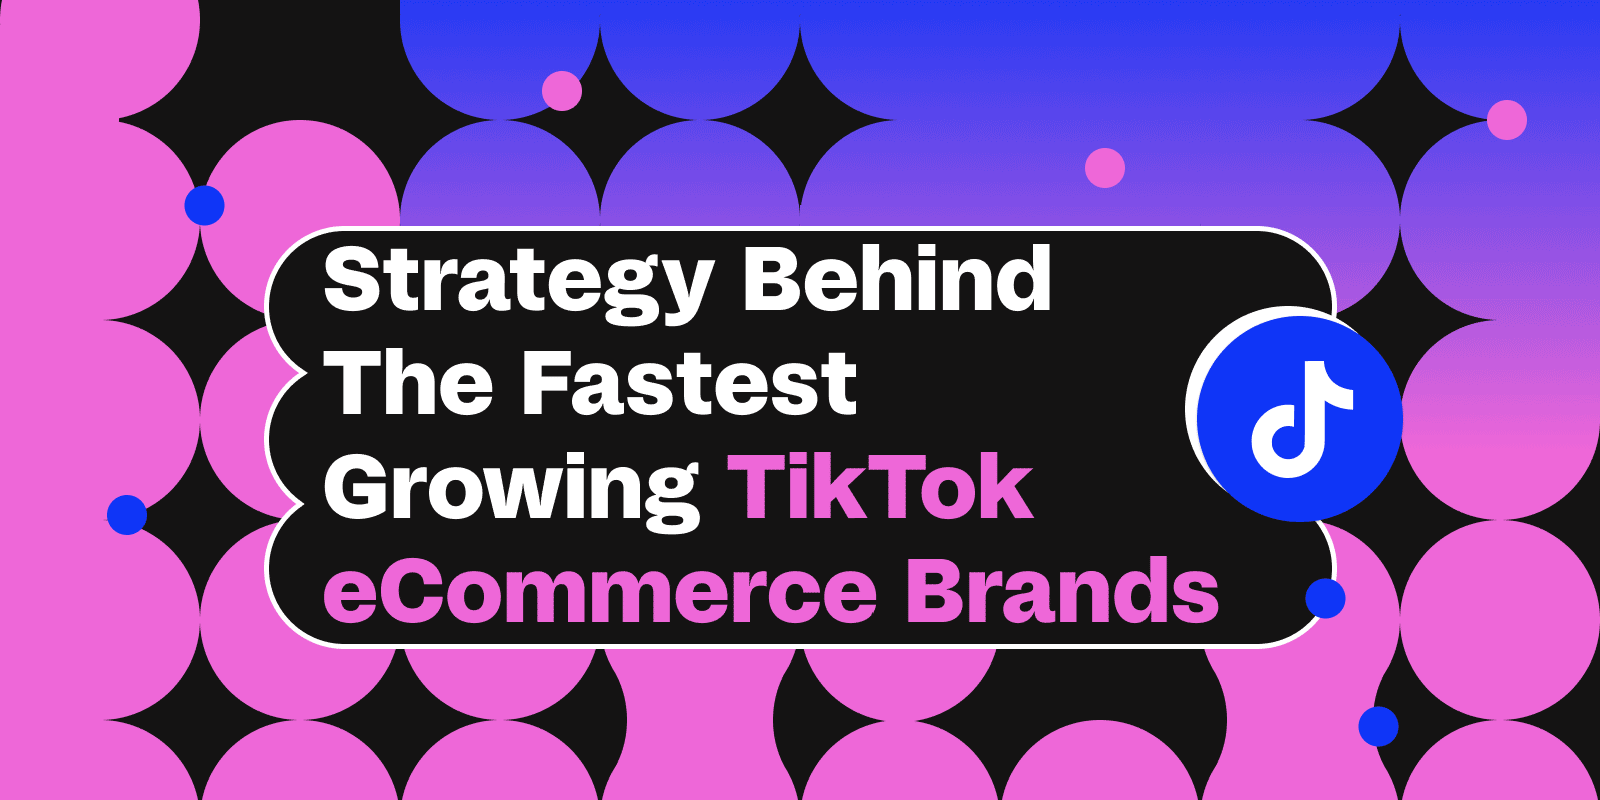 The Strategy Behind the Fastest Growing TikTok eCommerce Brands